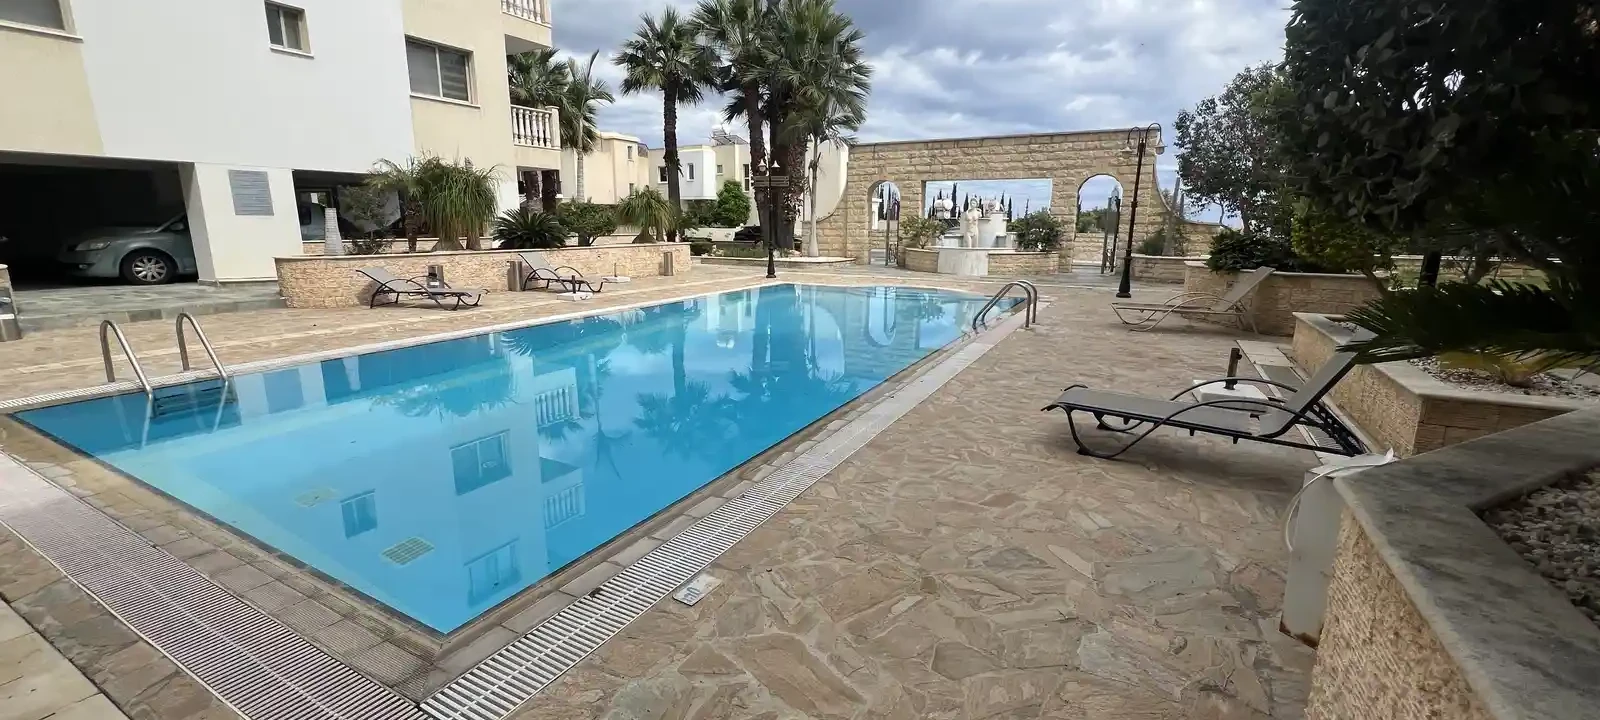 1-bedroom apartment fоr sаle €169.000, image 1